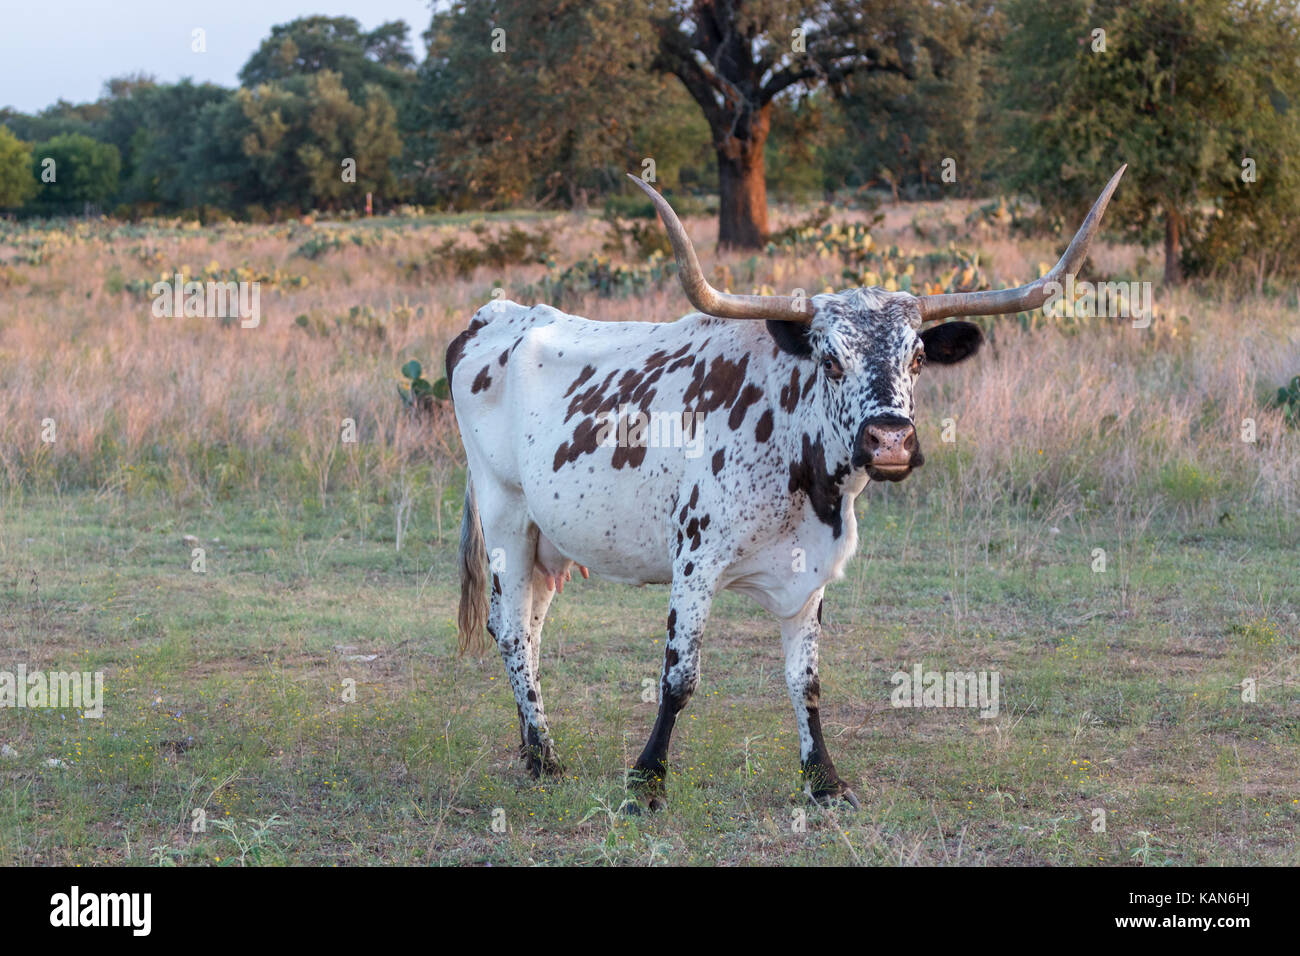 View of a Texas Longhorn Standing on Field Stock Photo